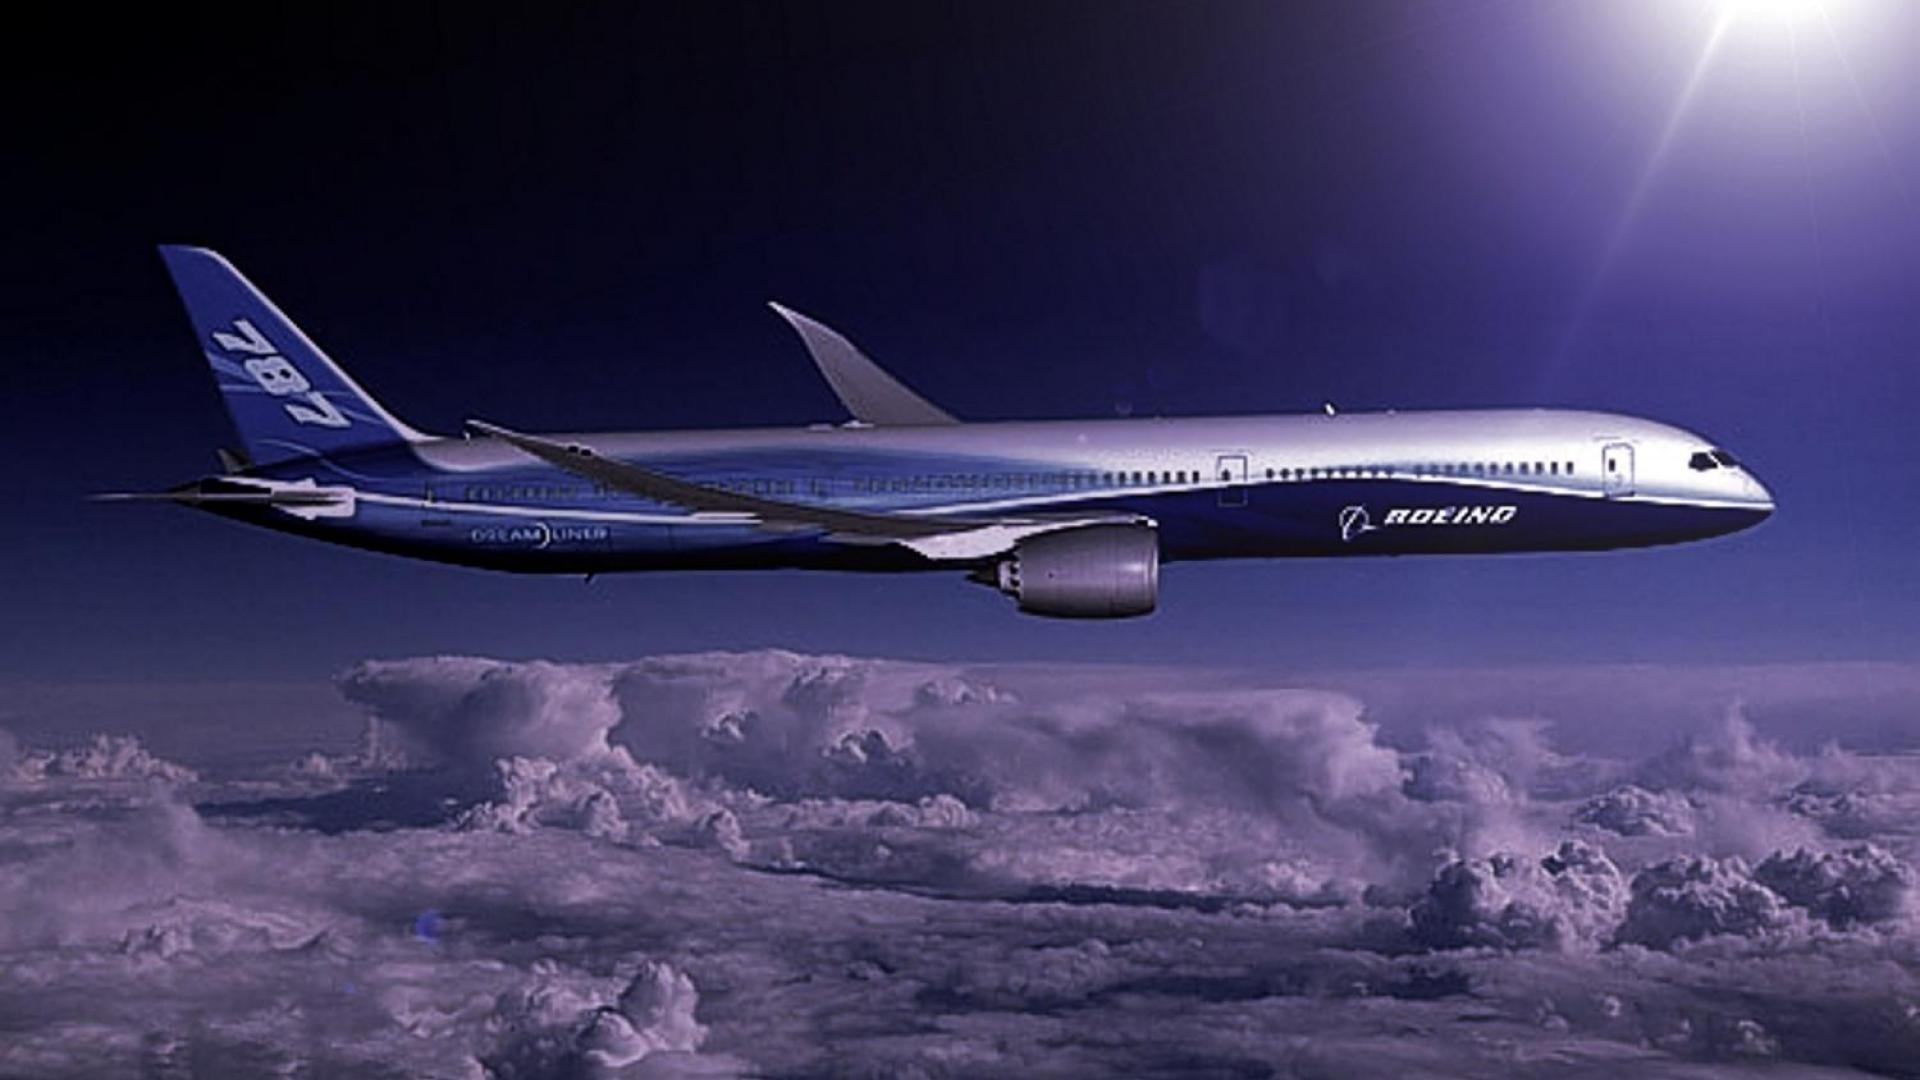 The New Boeing High Quality And Resolution Wallpaper